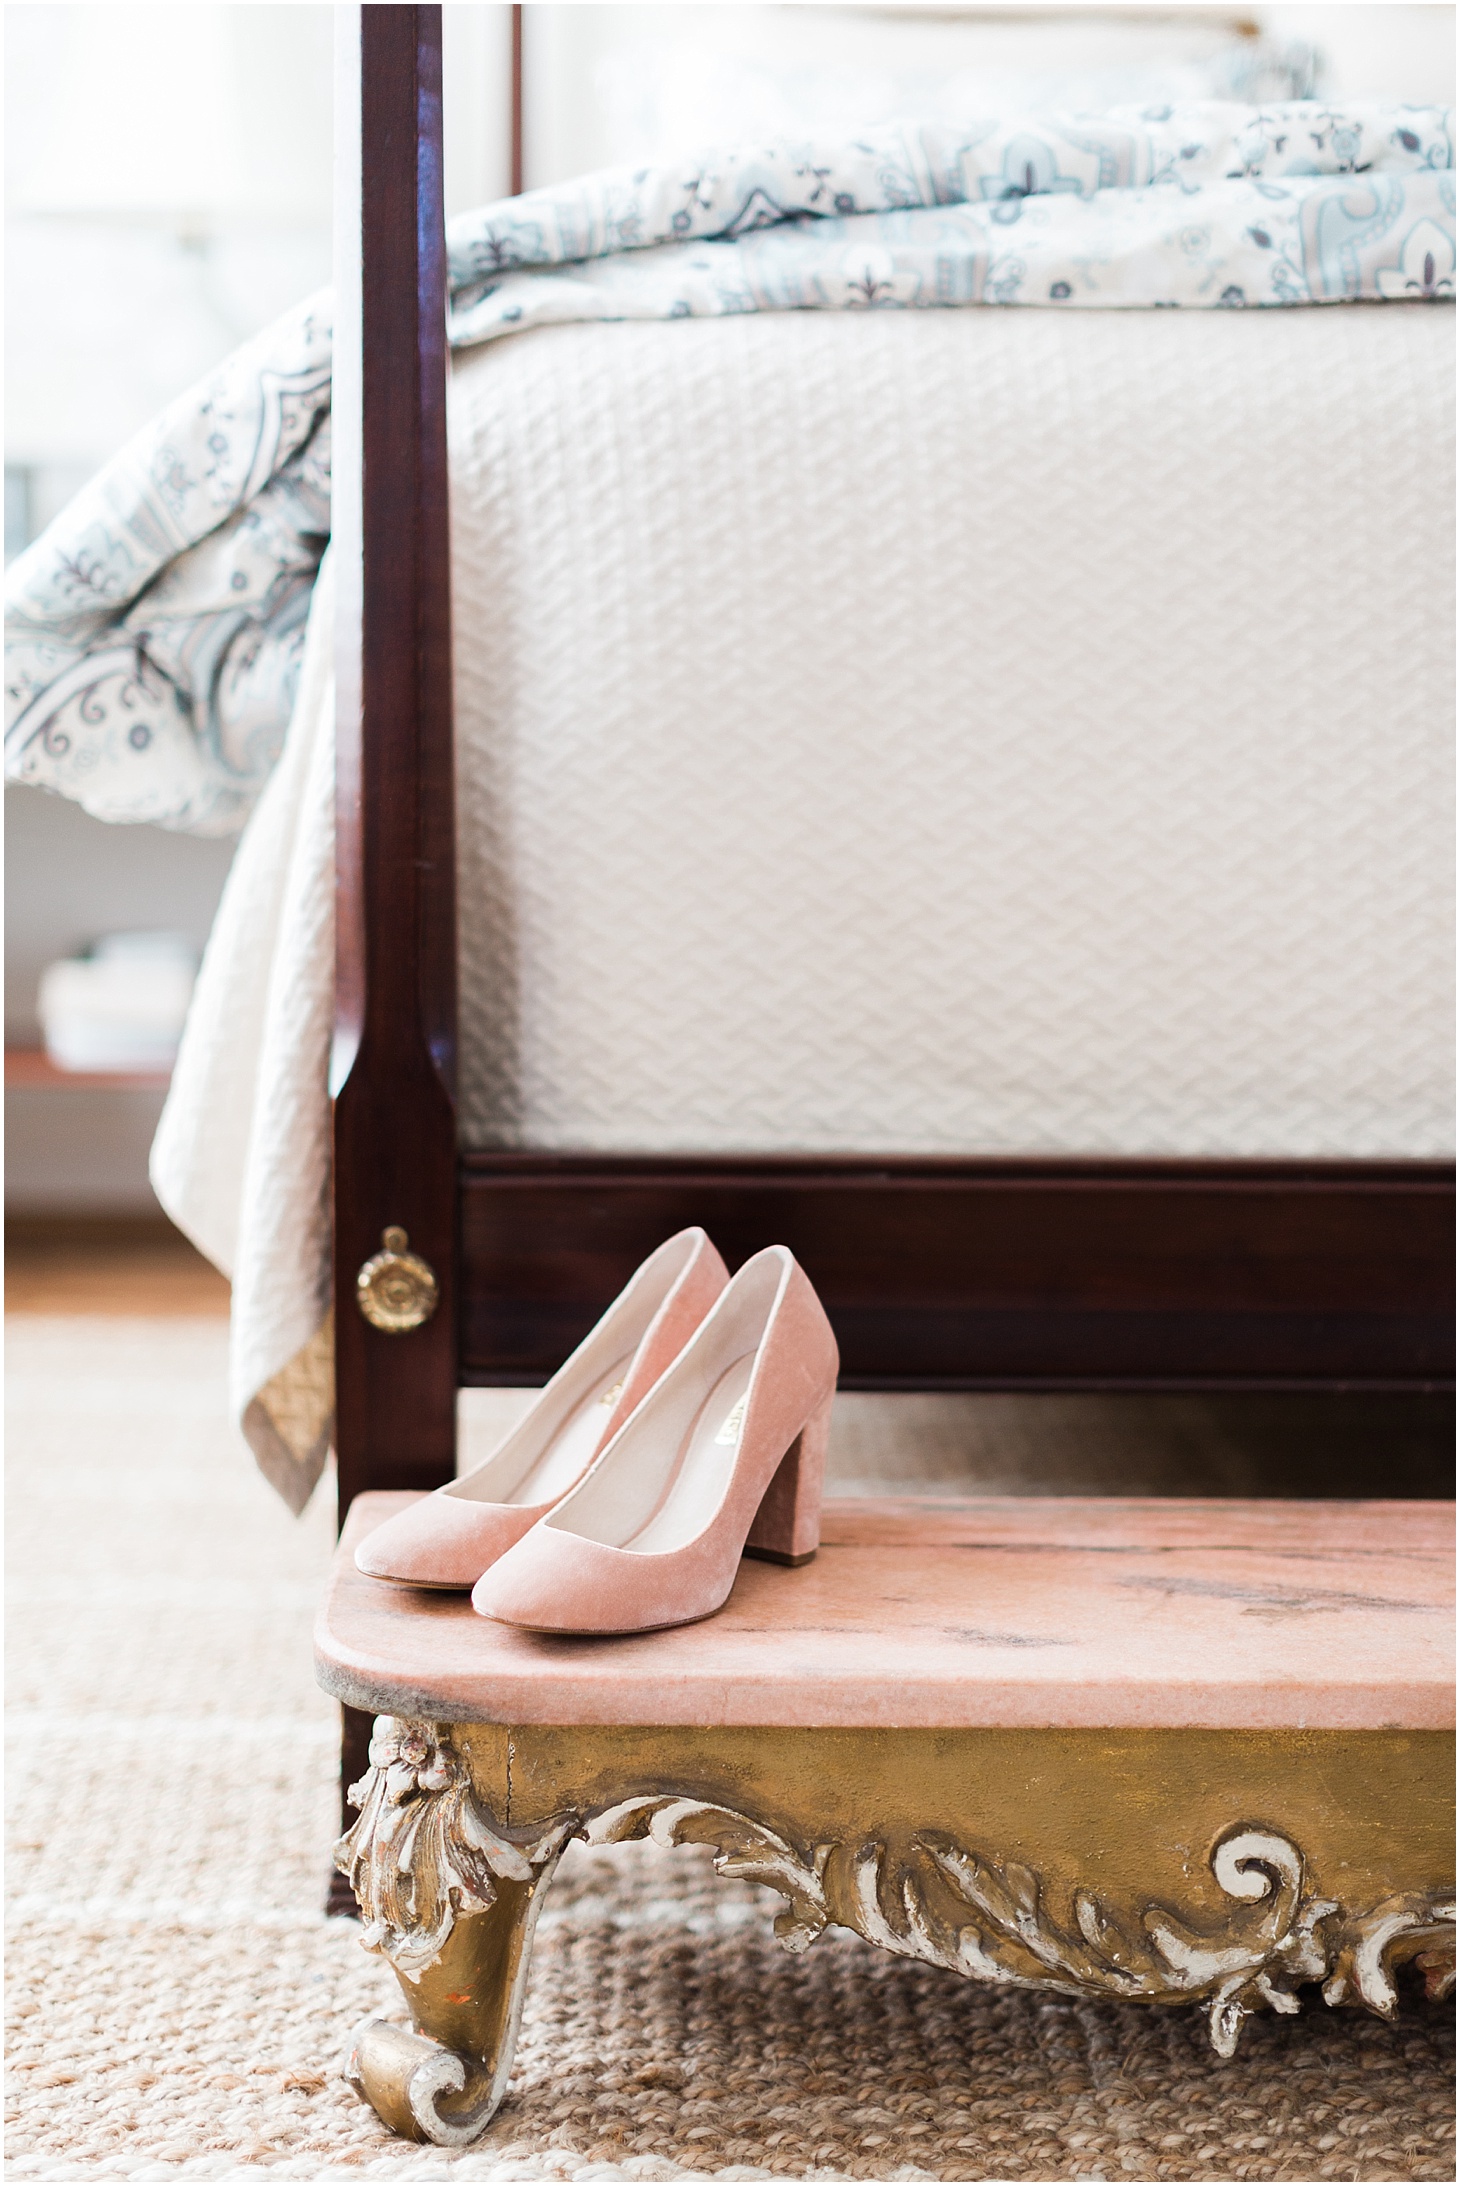 Blush Velvet Wedding Shoes | Ceremony at the Holy Rosary Church | Burgundy and Blush DC Wedding at District Winery | Sarah Bradshaw Photography